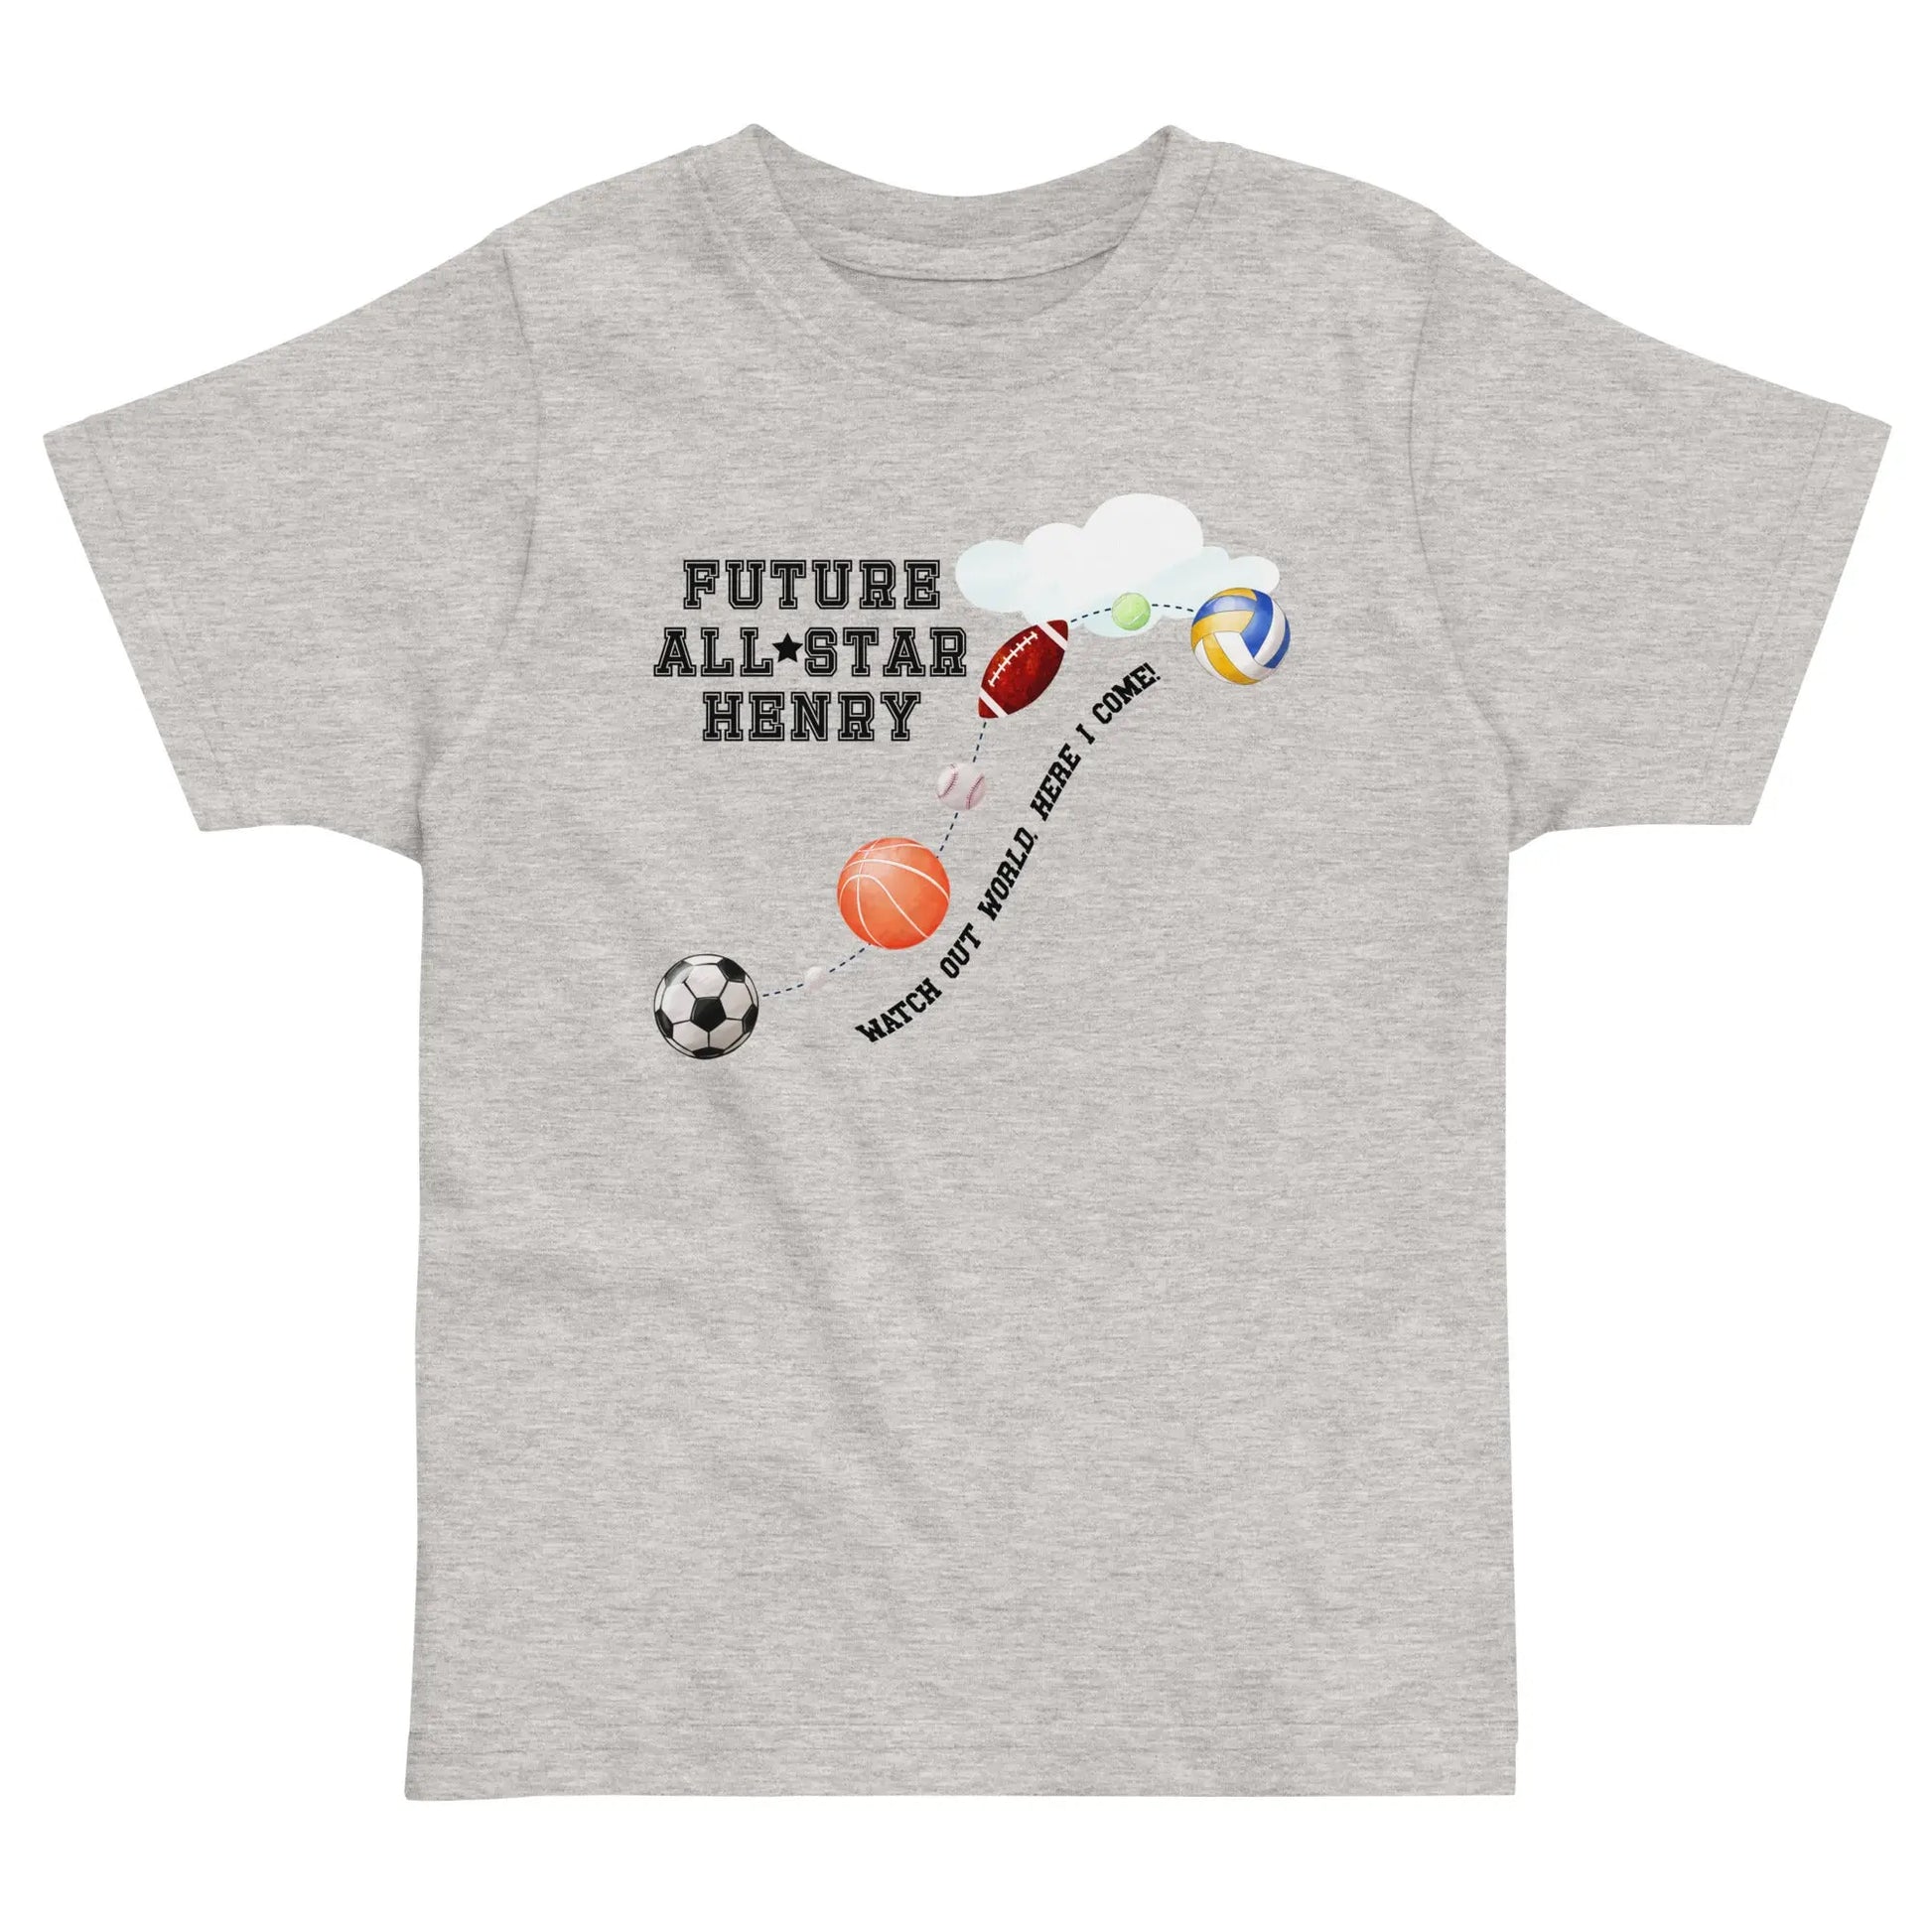 All Star Sports Personalized Toddler T-shirt Amazing Faith Designs